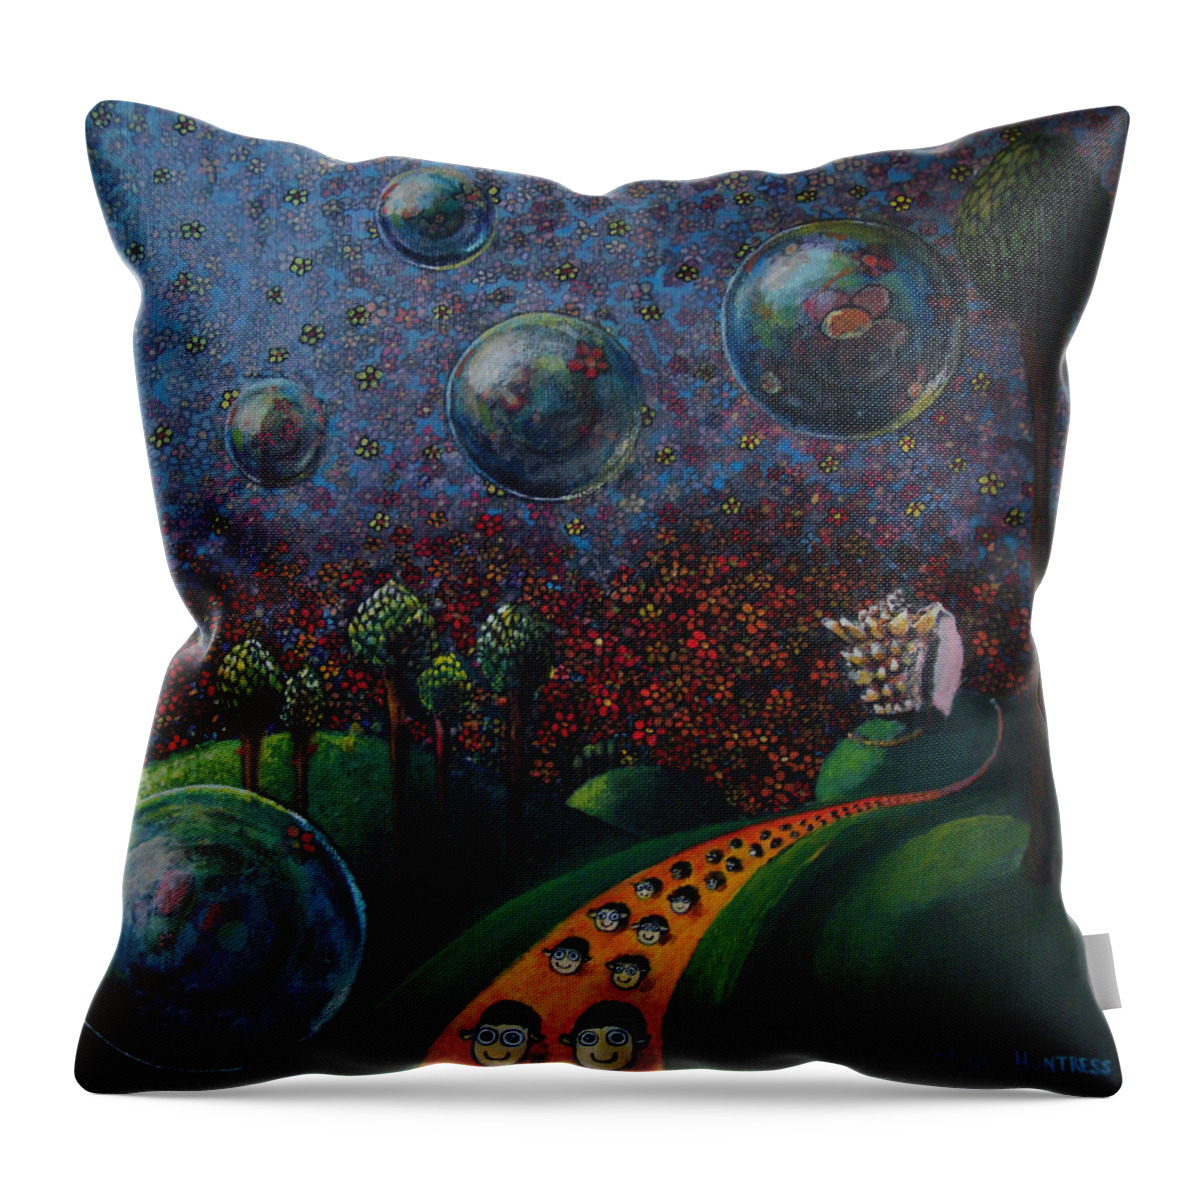 Flowers Throw Pillow featuring the painting Out of Her Shell by Mindy Huntress